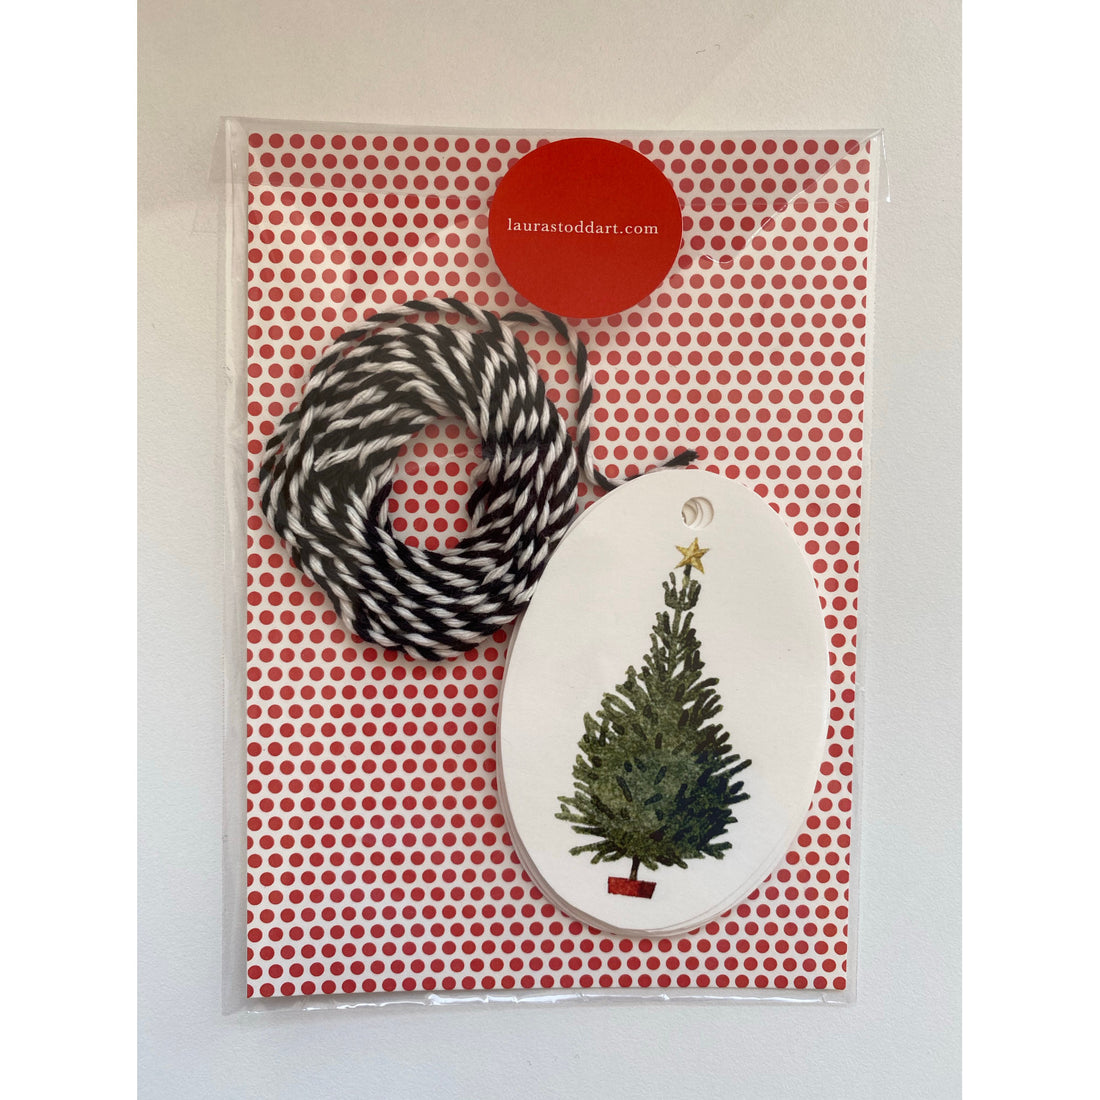 An environmentally responsible Christmas Trees Gift Tags ornament in a red and white gift bag, perfect for Christmas presents or as Hester &amp; Cook gift tags.